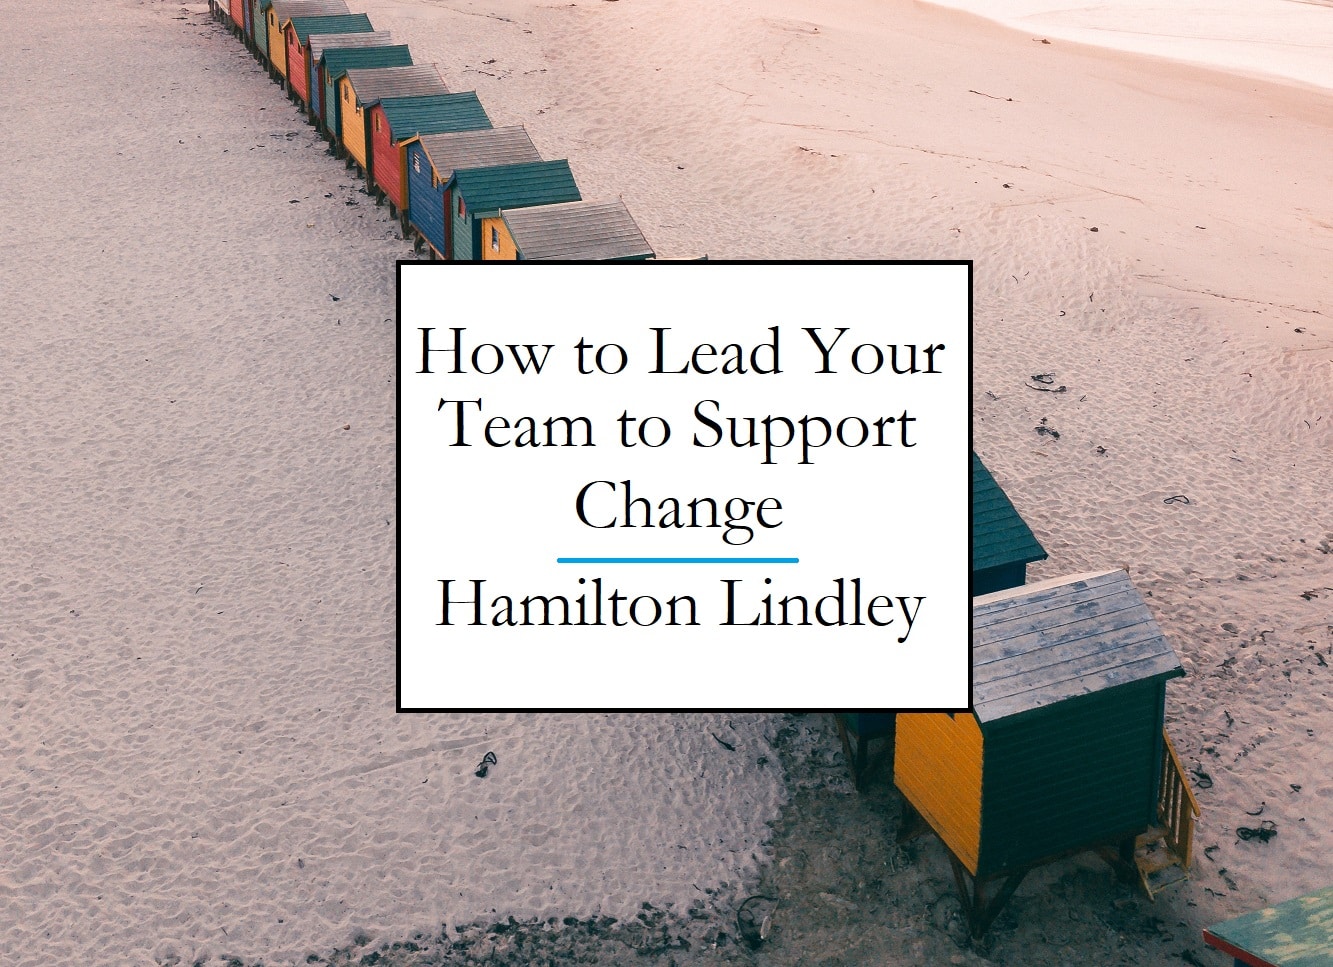 How Do You Lead Your Team to Support Change?